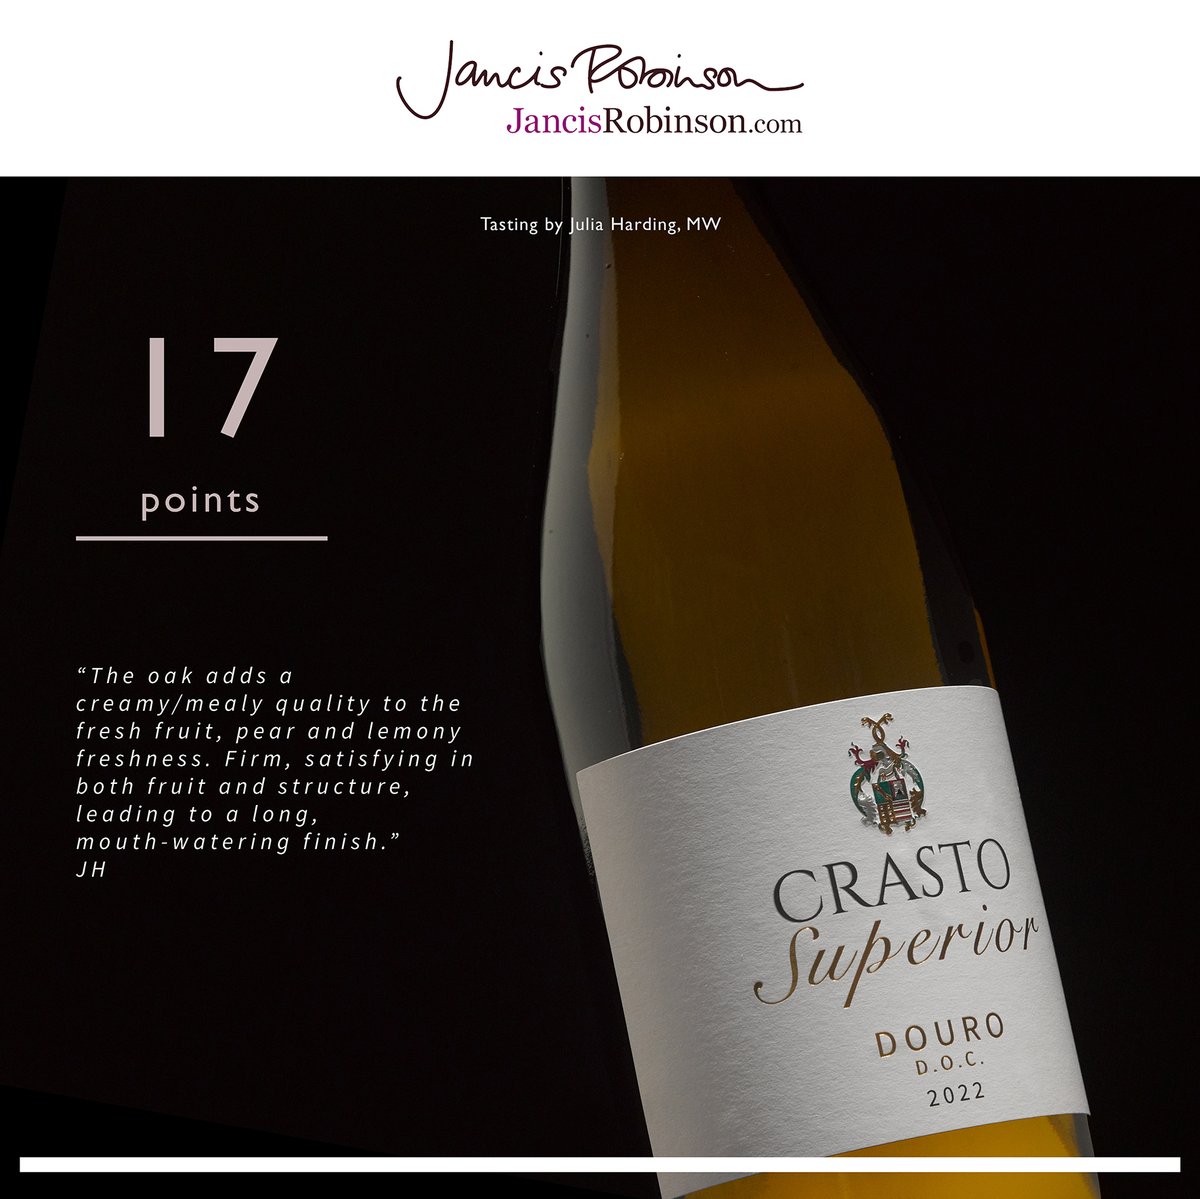 #CrastoSuperior White 2022 was awarded 17 points in a rating given by Julia Harding MW for @JancisRobinson. Thank you very much for this excellent recognition. 🙏🏼🍷👌🏼👉🏼 Learn more about this #wine here:
quintadocrasto.pt/crasto-superio… #CrastoWhite #DouroWines #VinhosdoDouro #Vegan #Wines